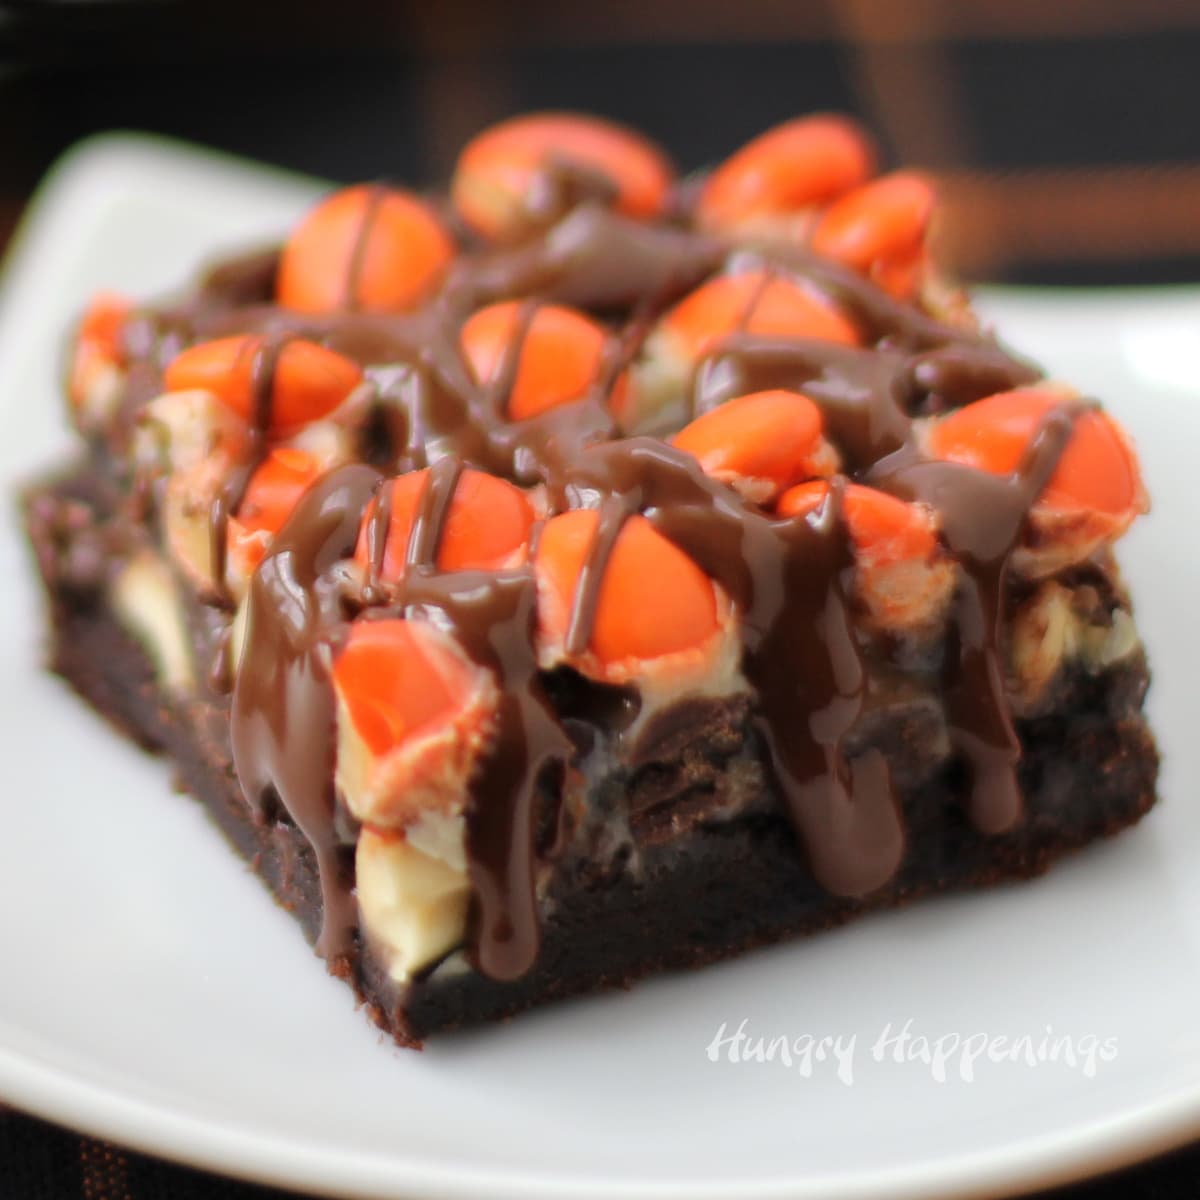 one chocolate magic bar topped with peanuts, Reese's Pieces, and chocolate glaze served on a small white plate.